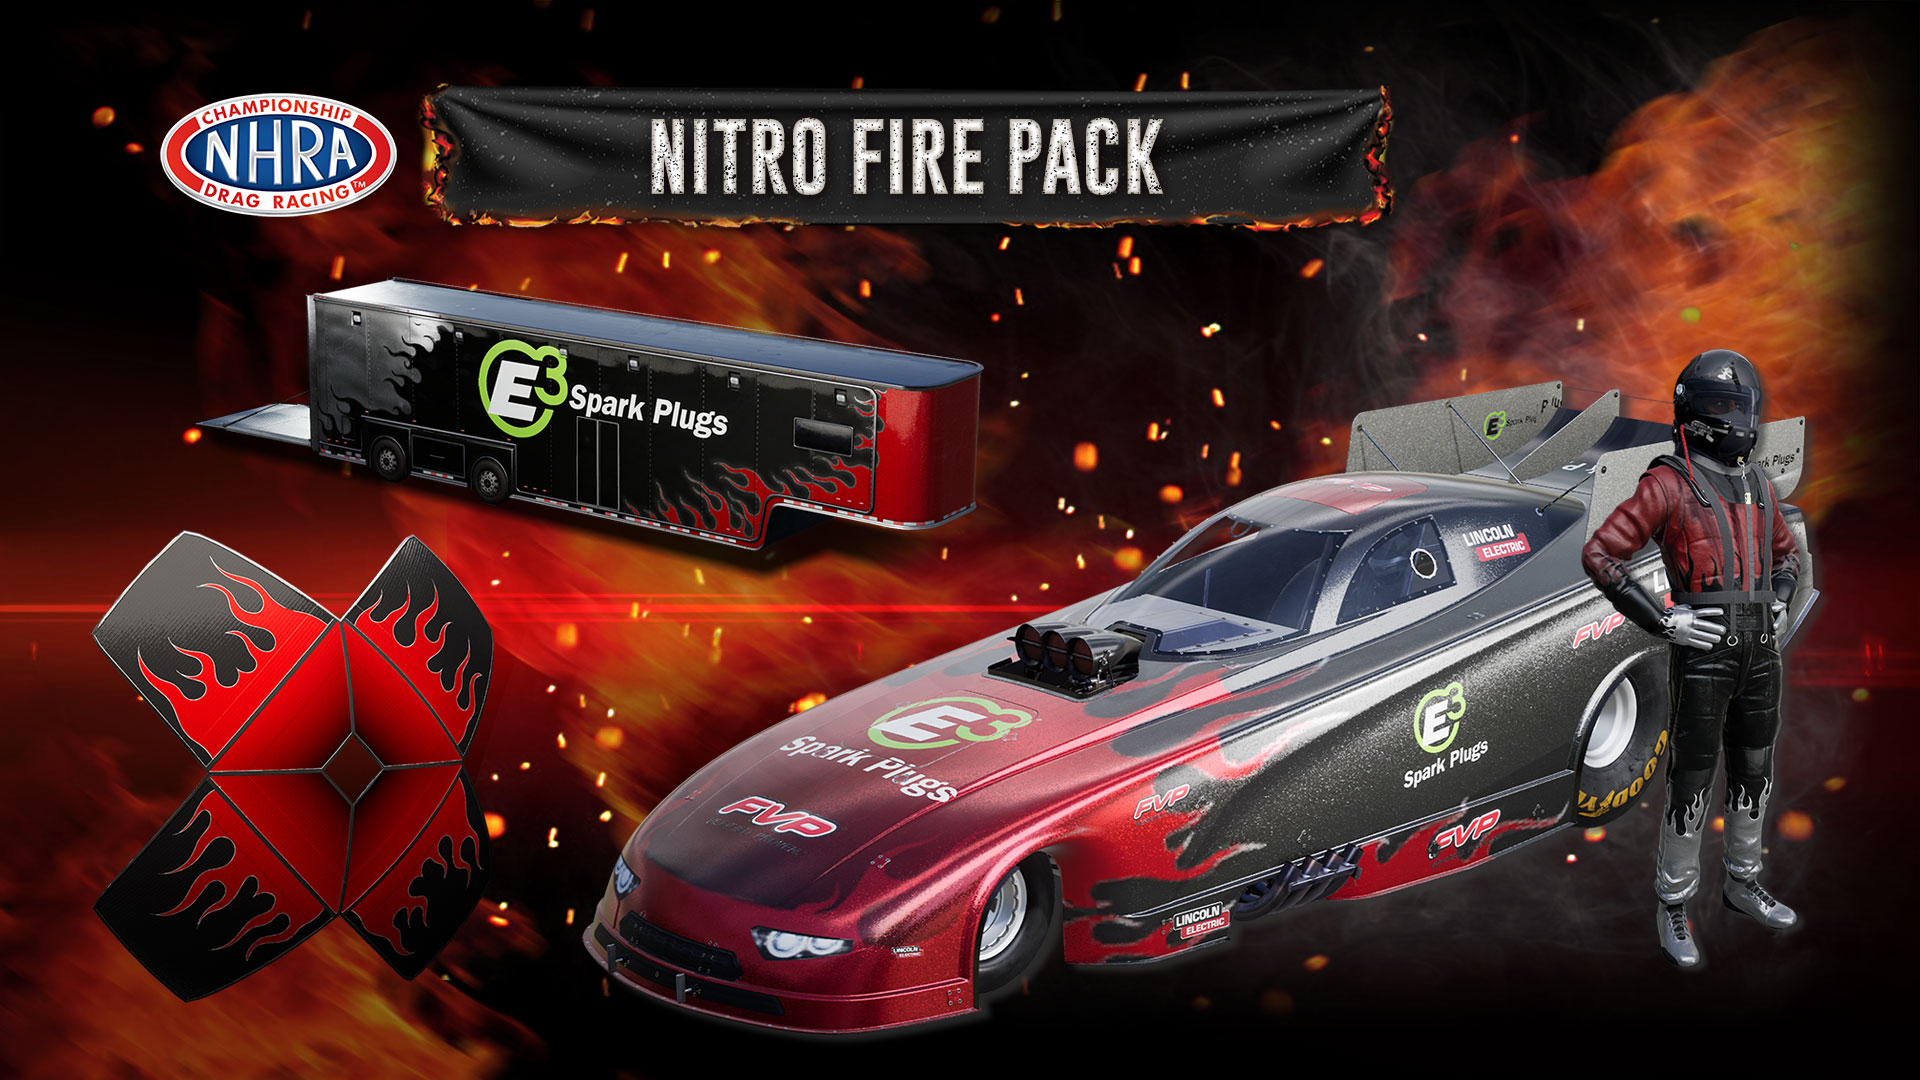 NHRA Championship Drag Racing: Speed for All - Nitro Fire Pack